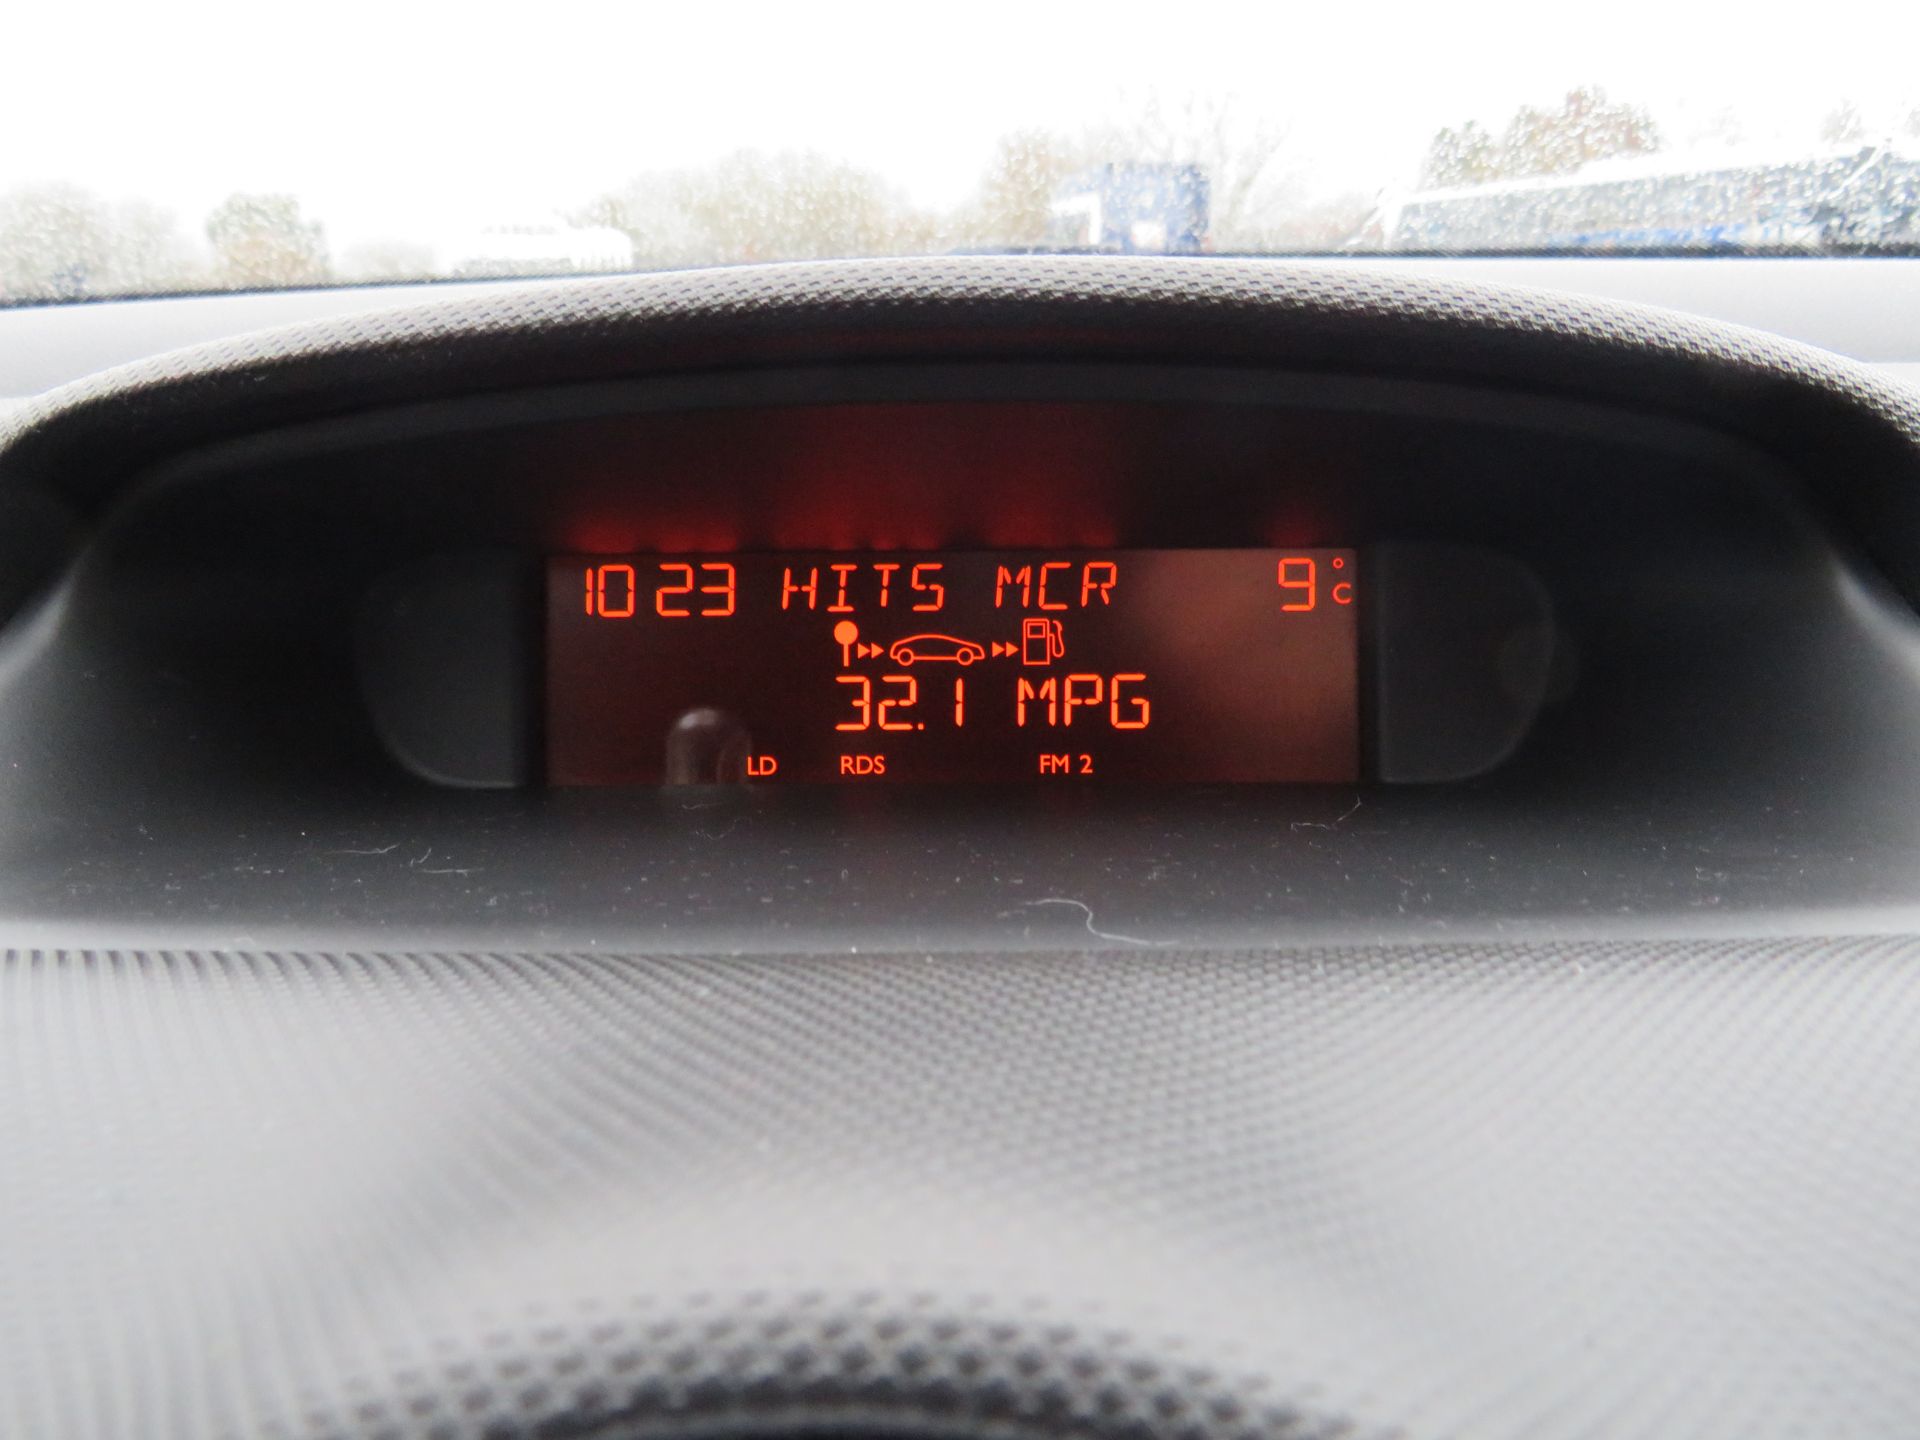 59 Plate Peugeot 308S 1.4 VTi, 60,554 miles (unchecked), MOT until Feb 2023, comes with V5 and - Image 10 of 12